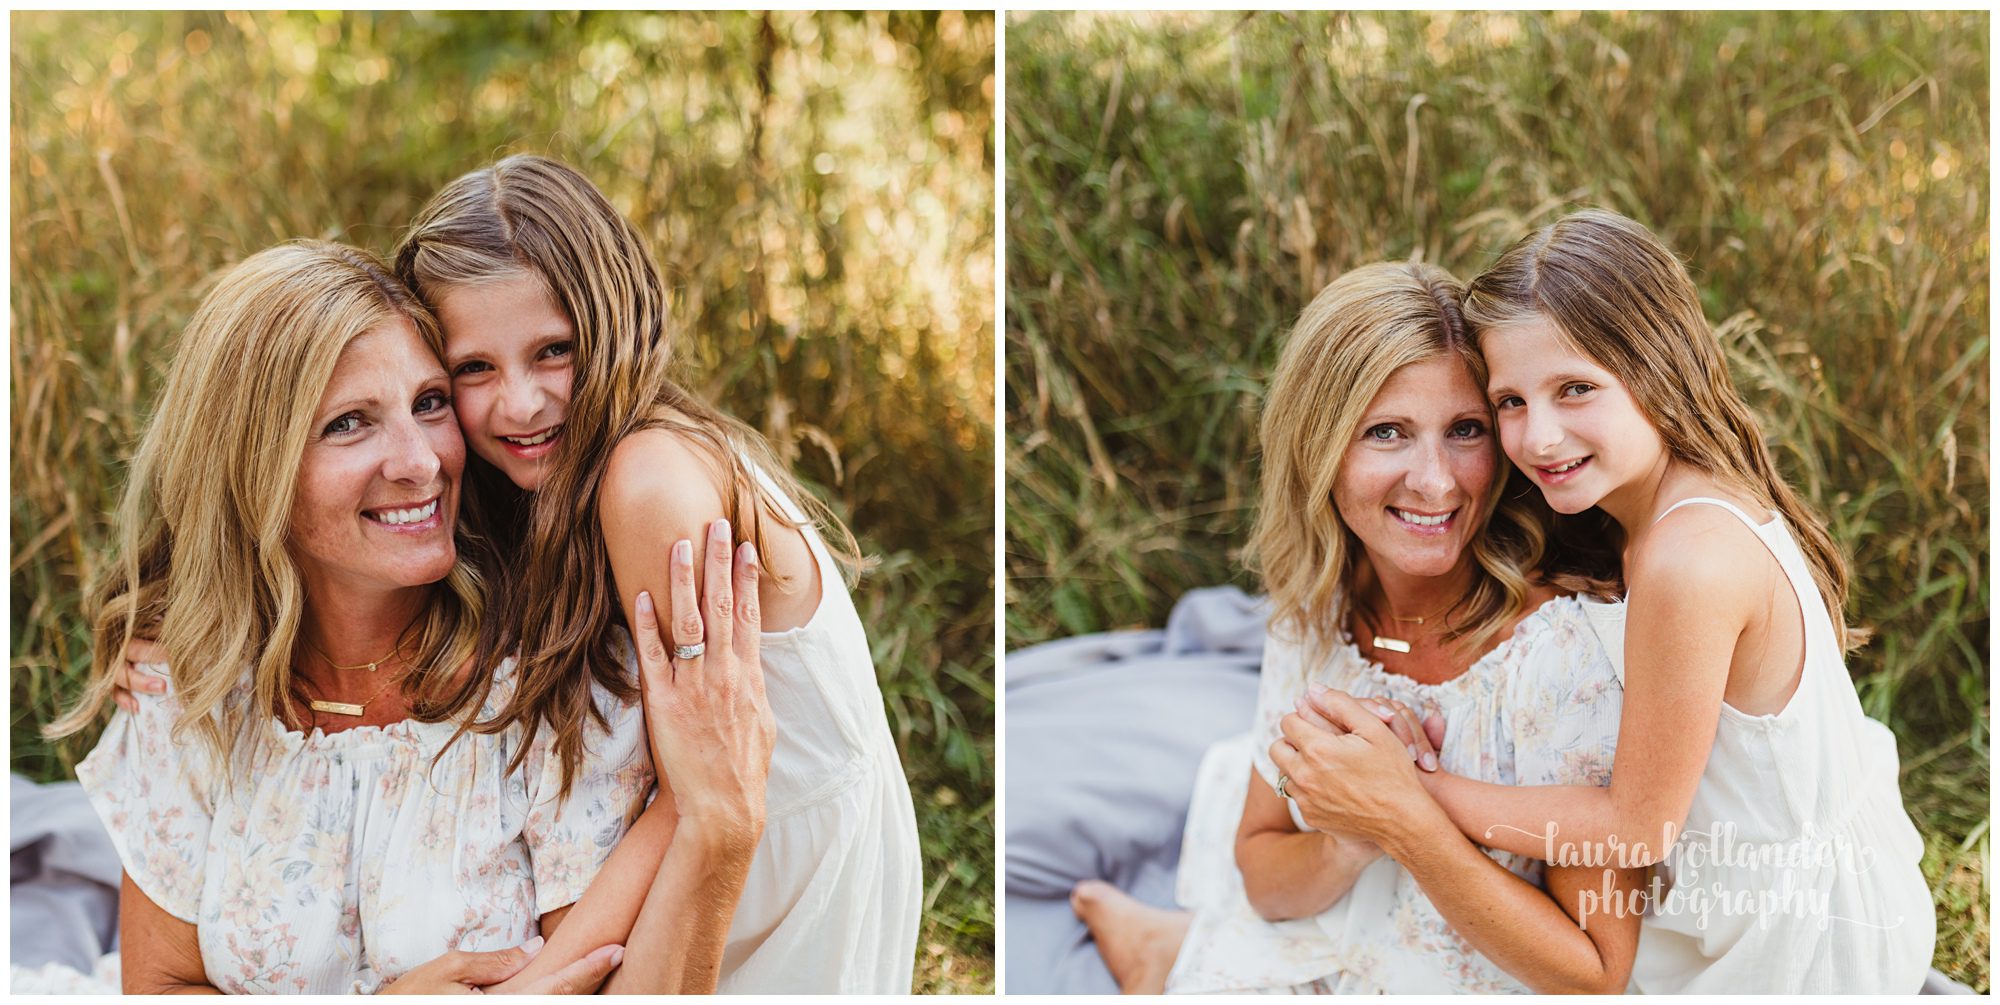 mommy and me session, Battle Creek MI, mother and daughter, Laura Hollander Photography